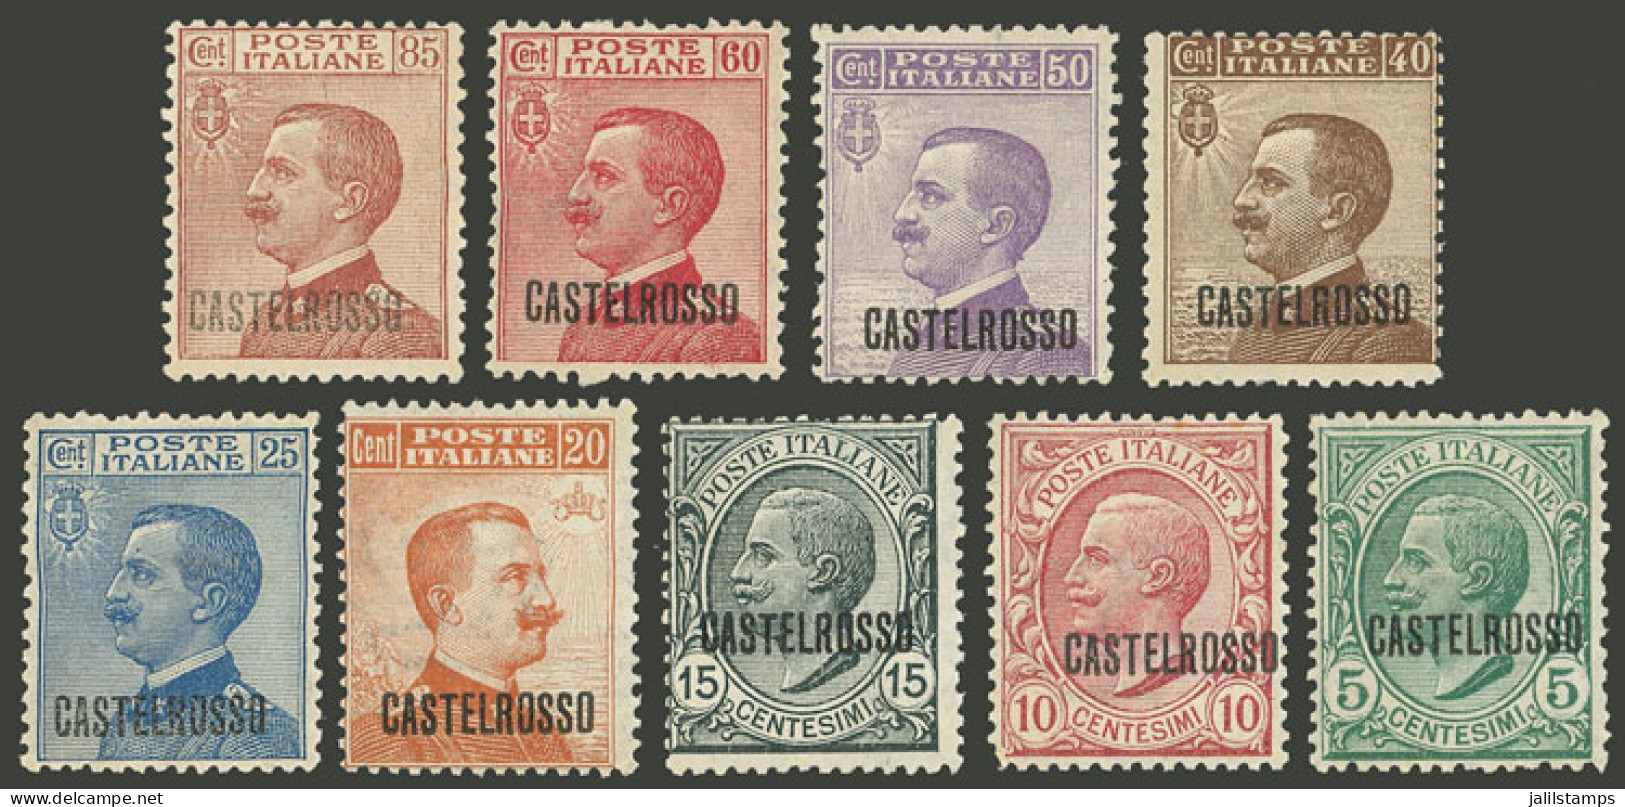 ITALY - CASTELROSSO: Sc.51/59, 1922 Complete Set Of 9 Overprinted Values, Mint Lightly Hinged, VF Quality! - Castelrosso